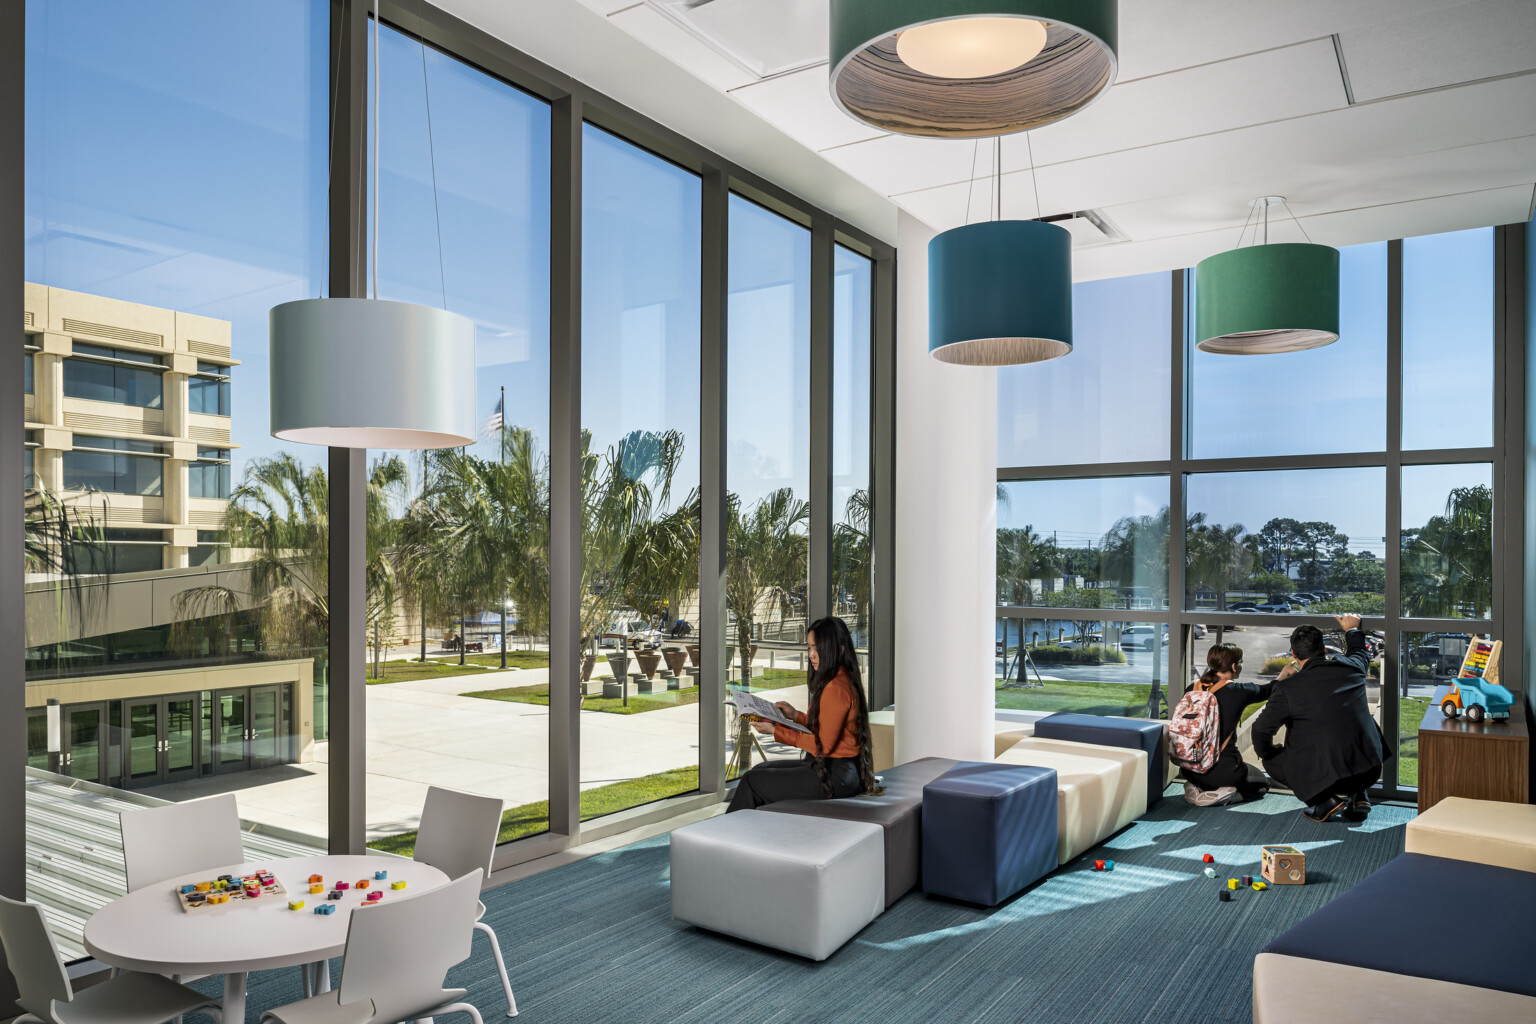 courthouse public area, high-ceilings, floor-to-ceiling windows fill all walls provide natural light, soothing blues and greens for flooring, modular seating areas, barrel lamps overhead with blue and green shades